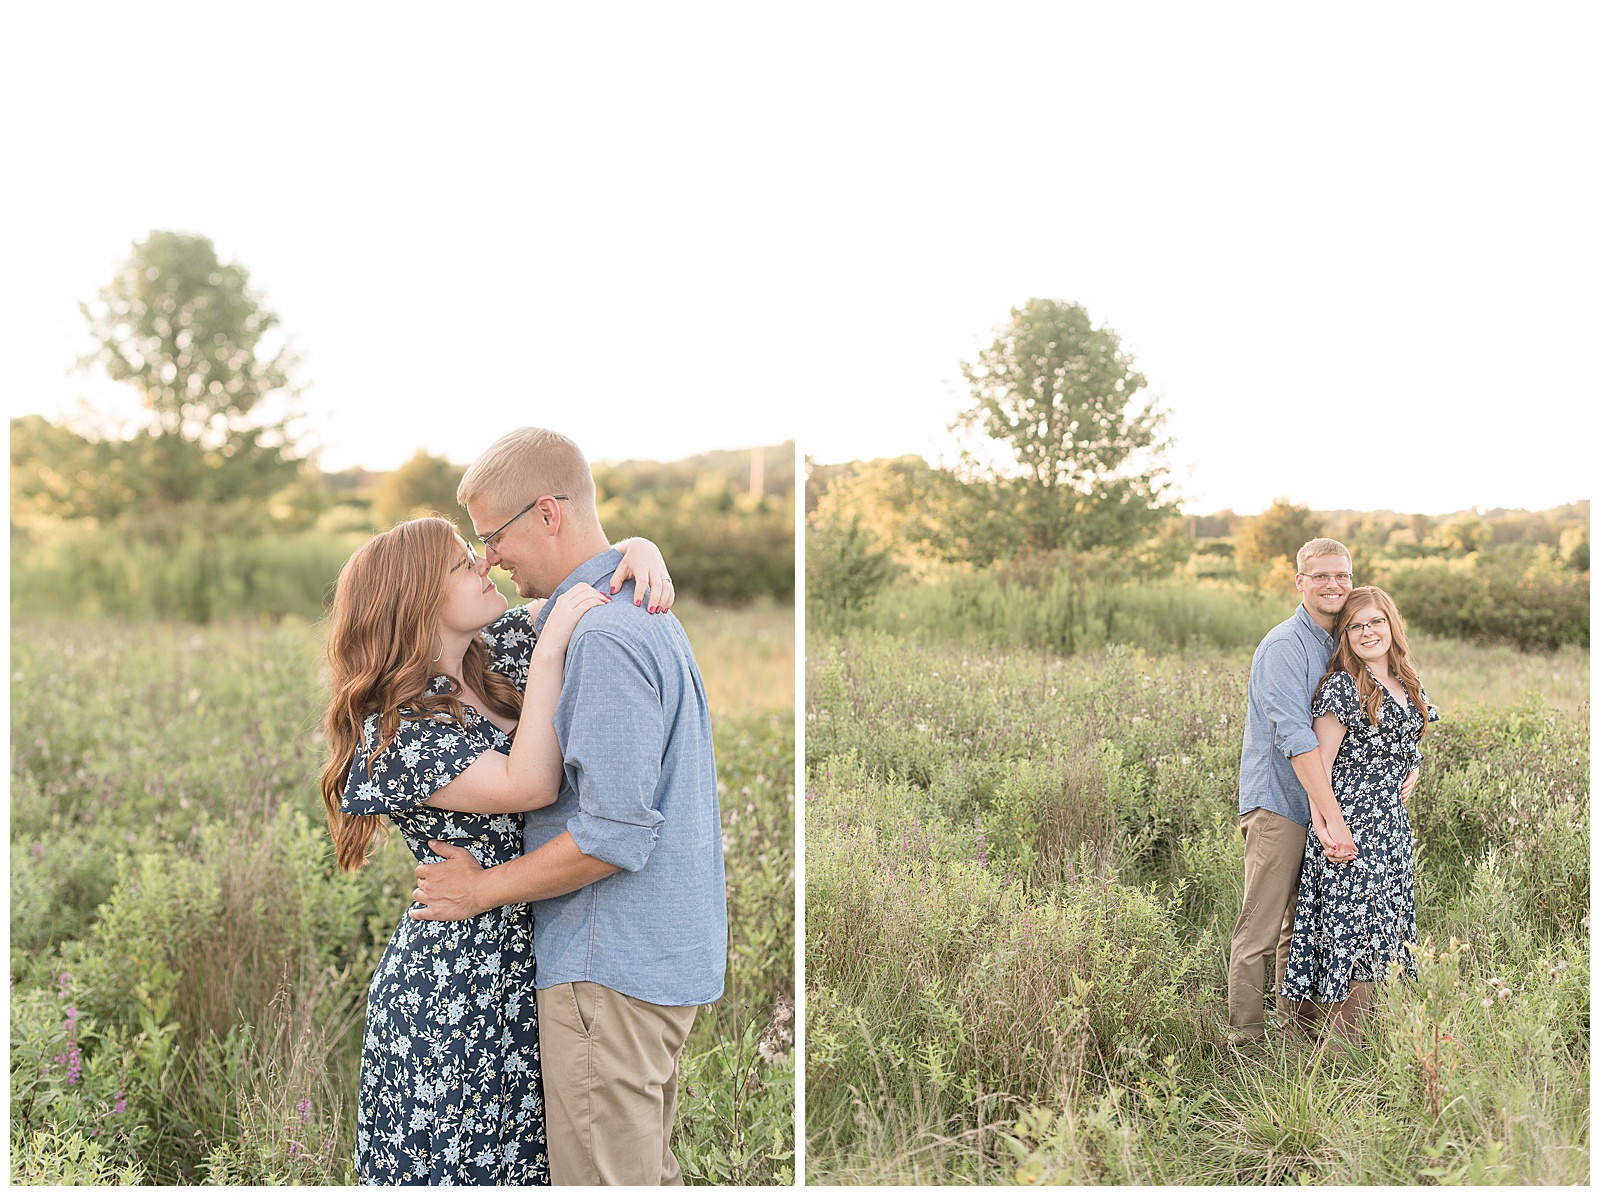 couple's engagement session during the summer at an open field of wild grasses